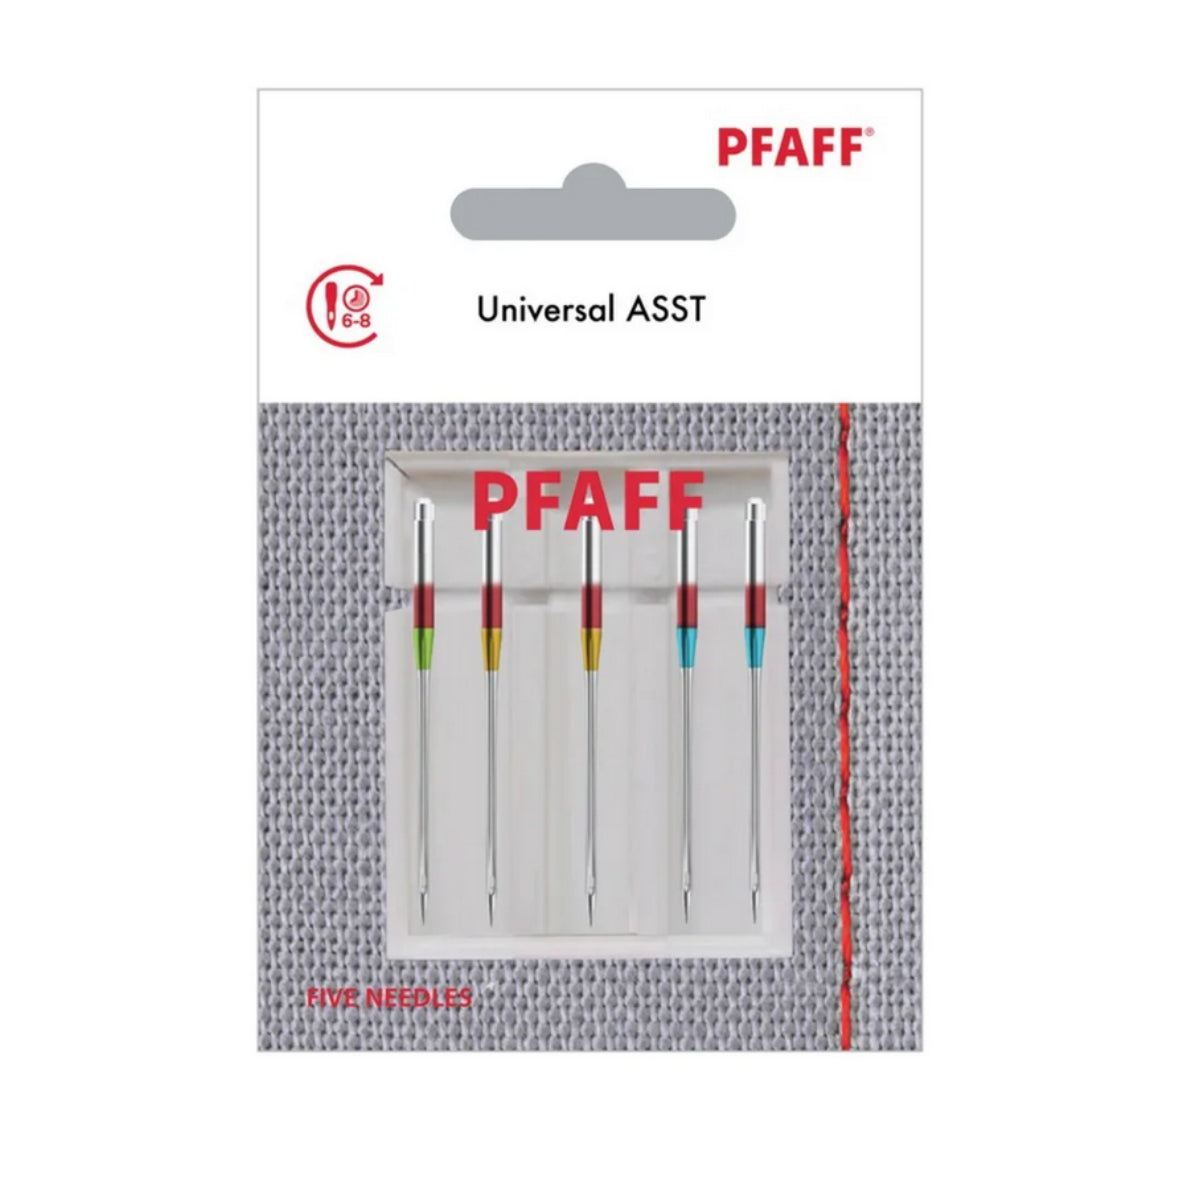 Large assorted packet of universal sewing machine needles for Pfaff sewing  machines